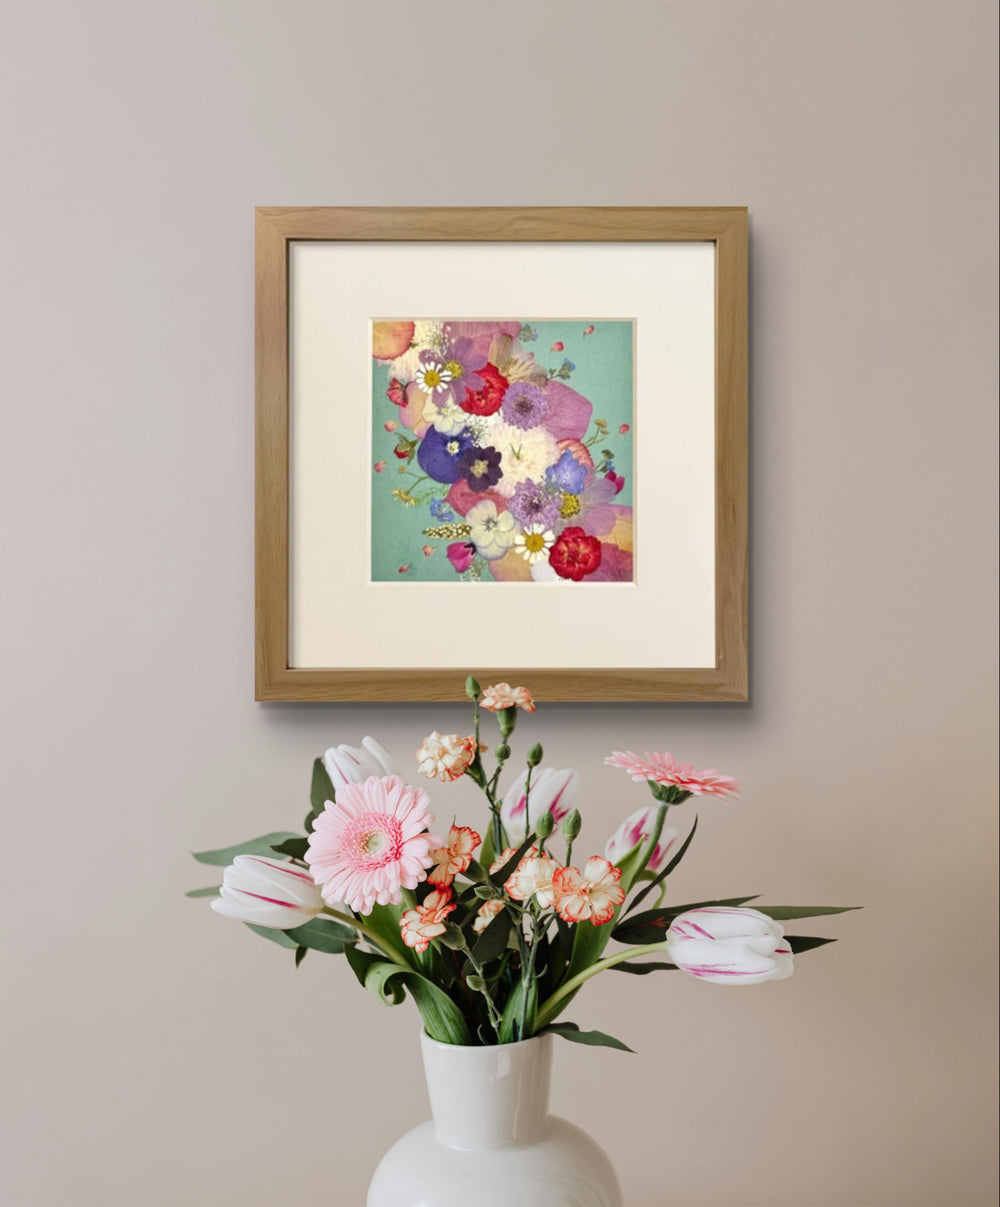 10 inches width 10 inches height pressed flower frame art that is green theme hanging on the wall.